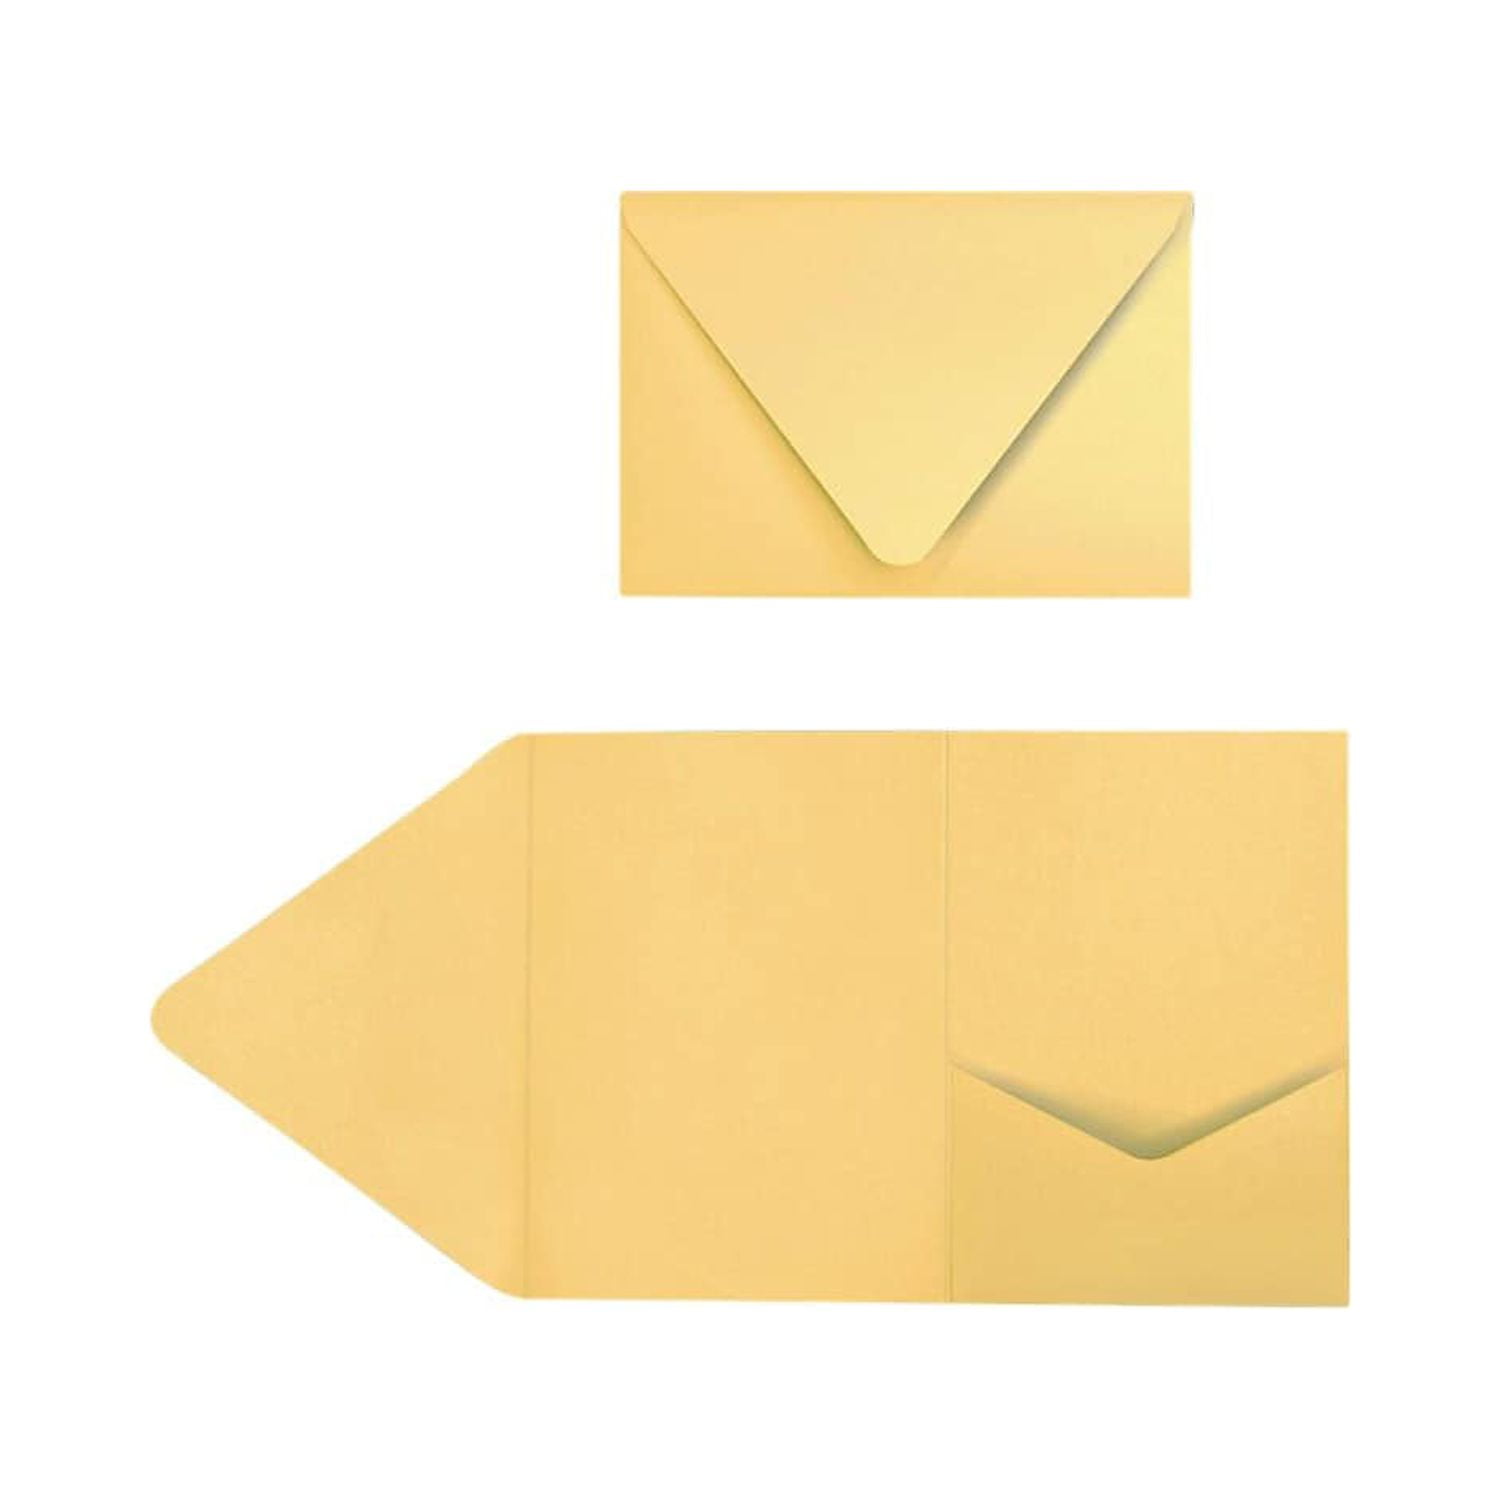 Gold Metallic A7 Pocket Invitations (5 x 7) - 10 Pack - by Jam Paper